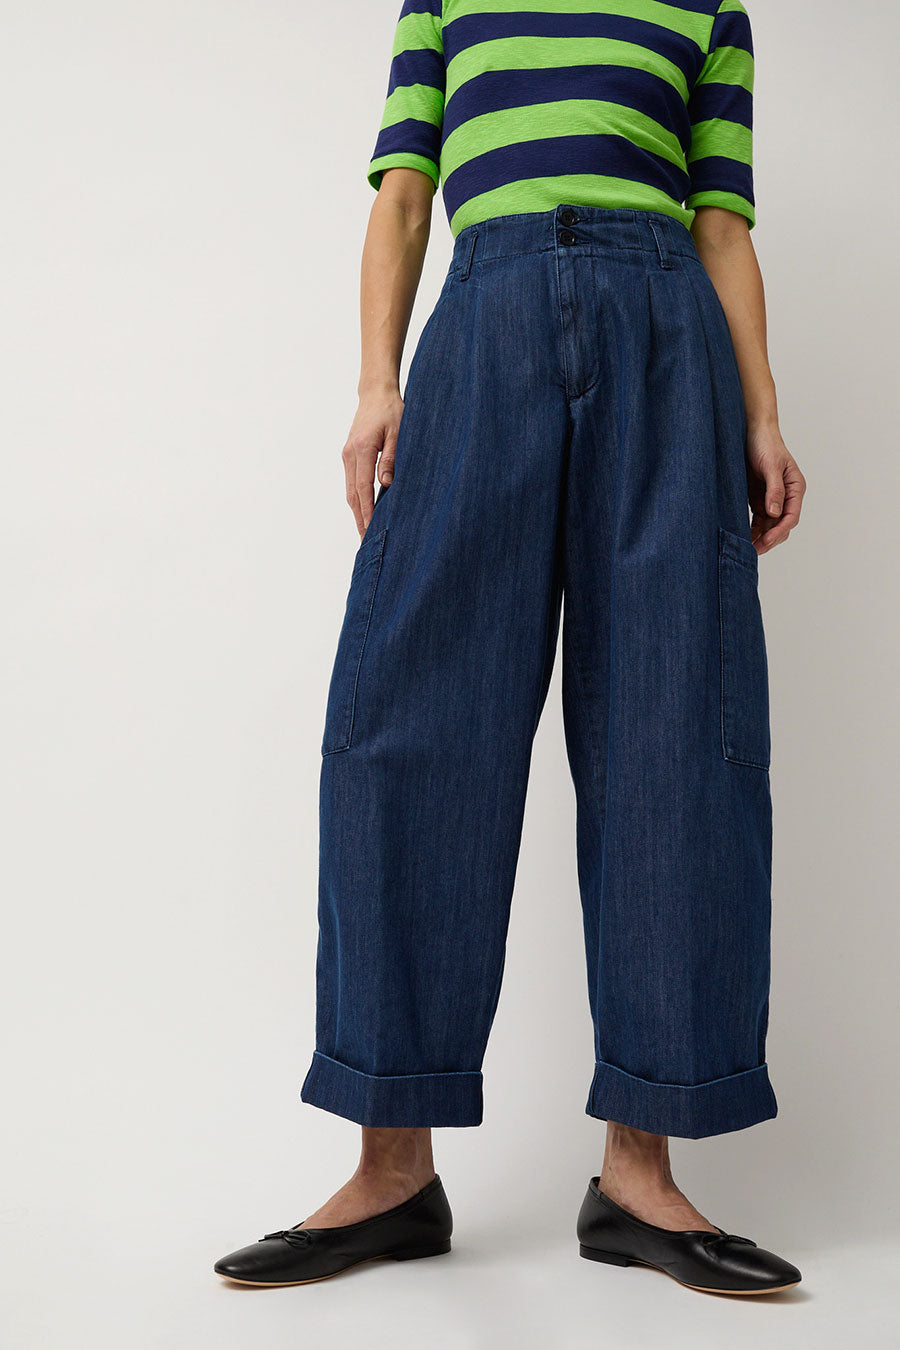 YMC Grease Trouser in Washed Indigo